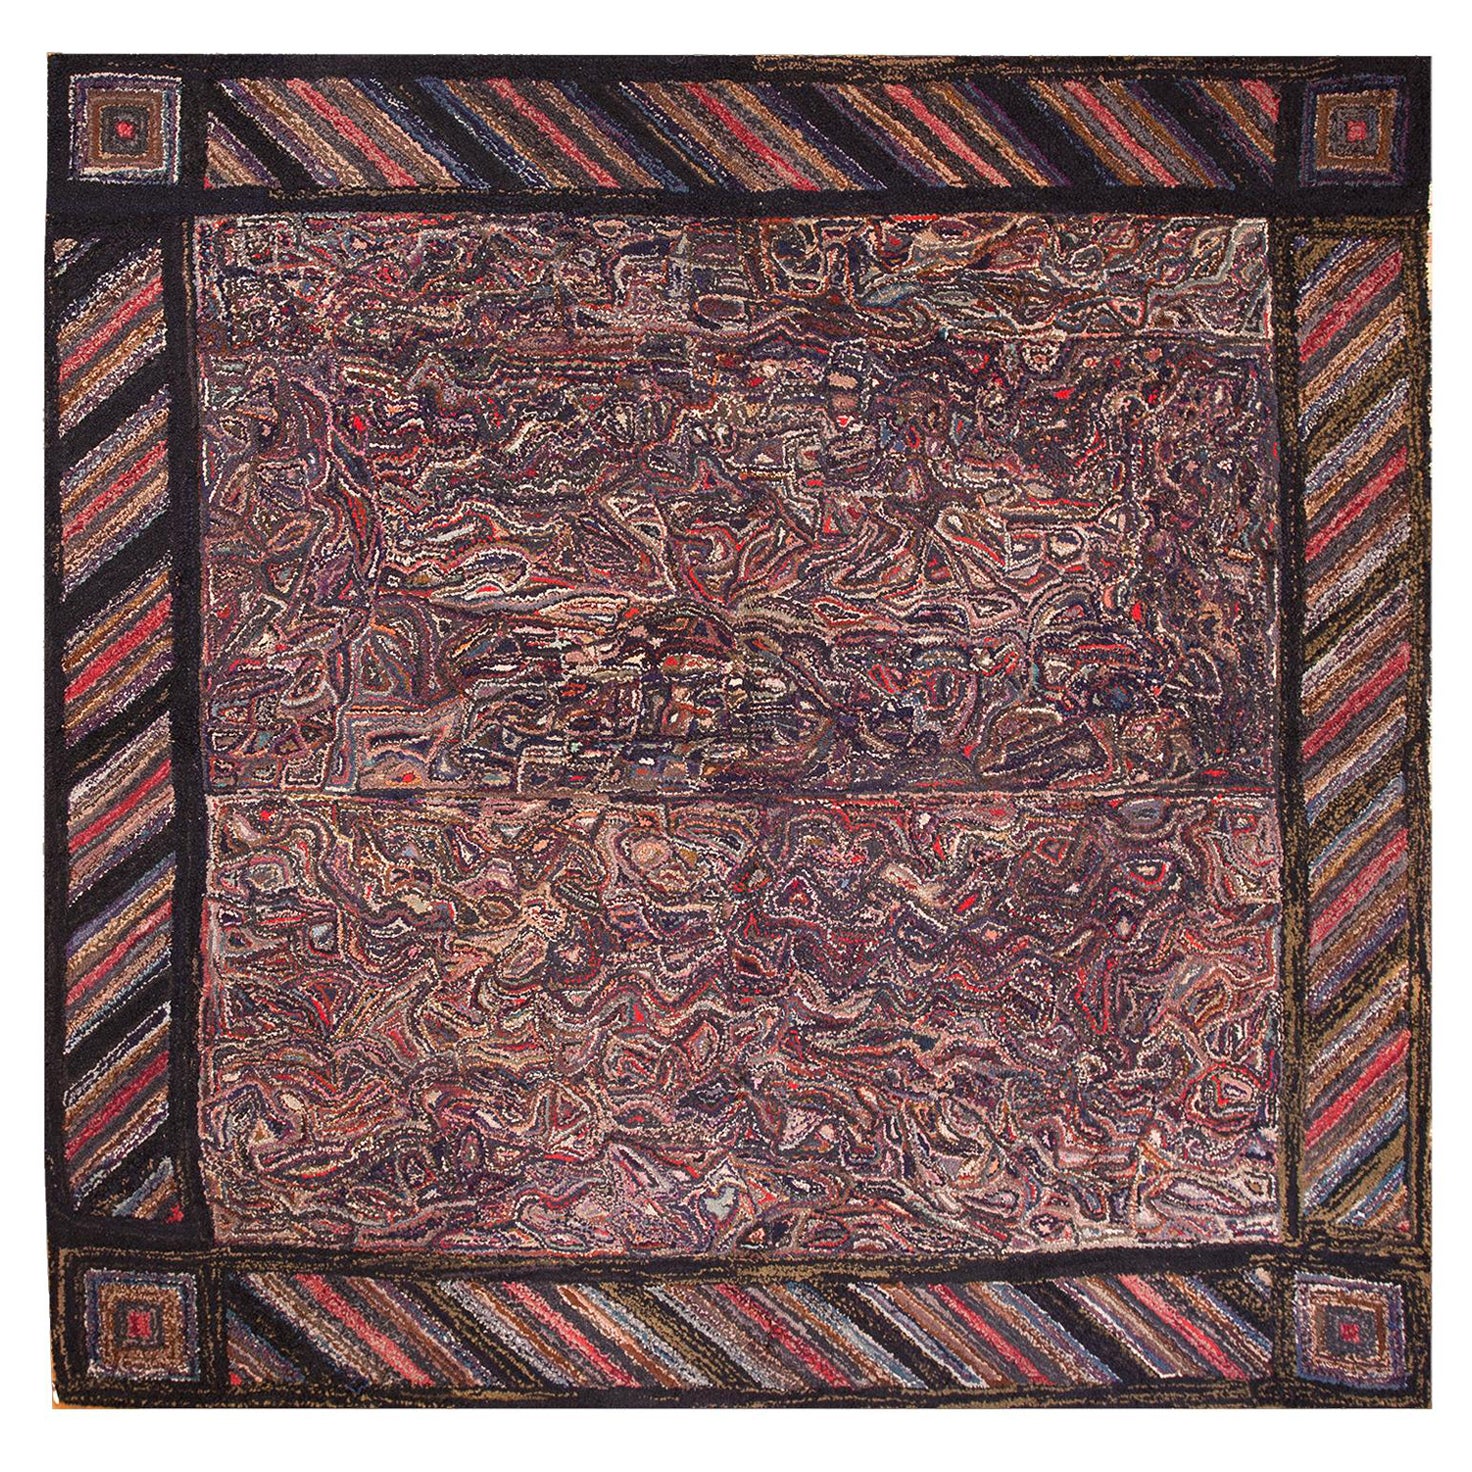 1930s Abstract Design American Hooked Rug ( 9'2" x 9'2" - 280 x 280 cm ) For Sale